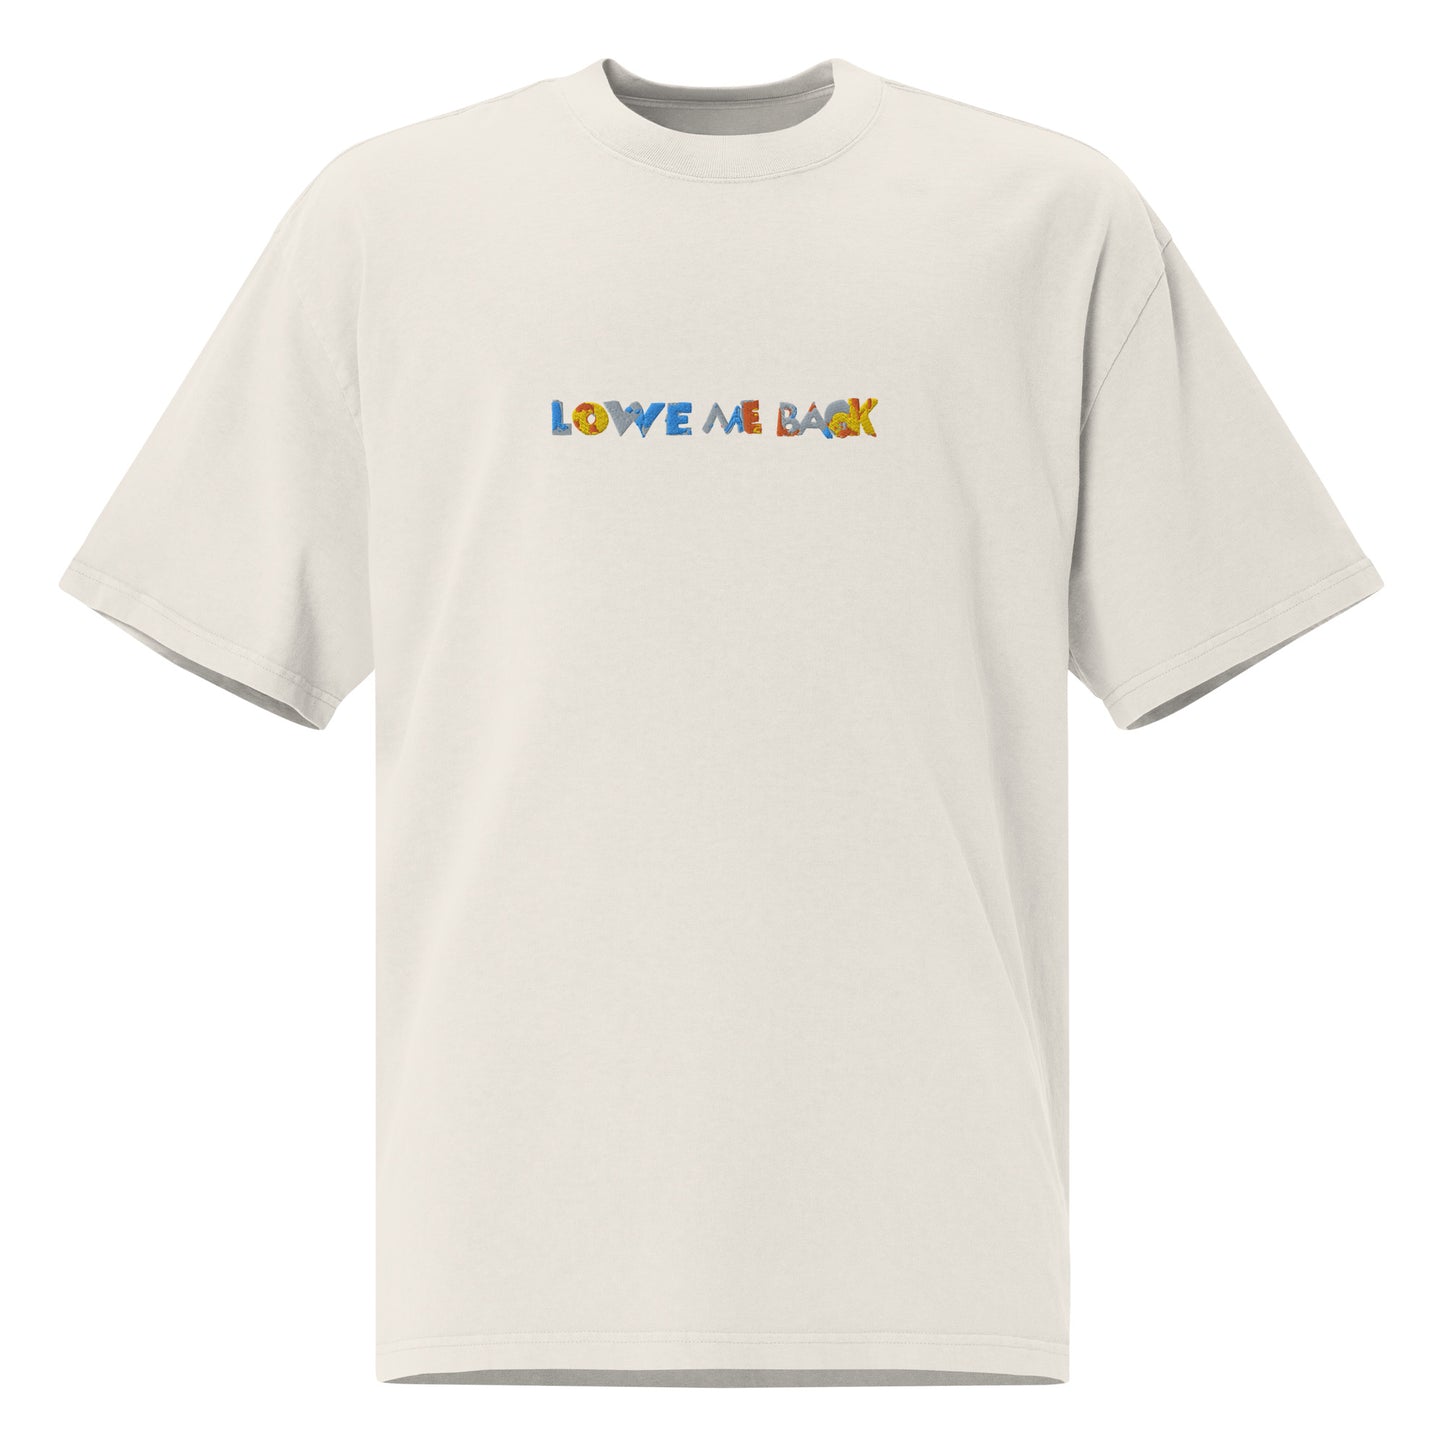 Embroidered Love Me Back t-shirt